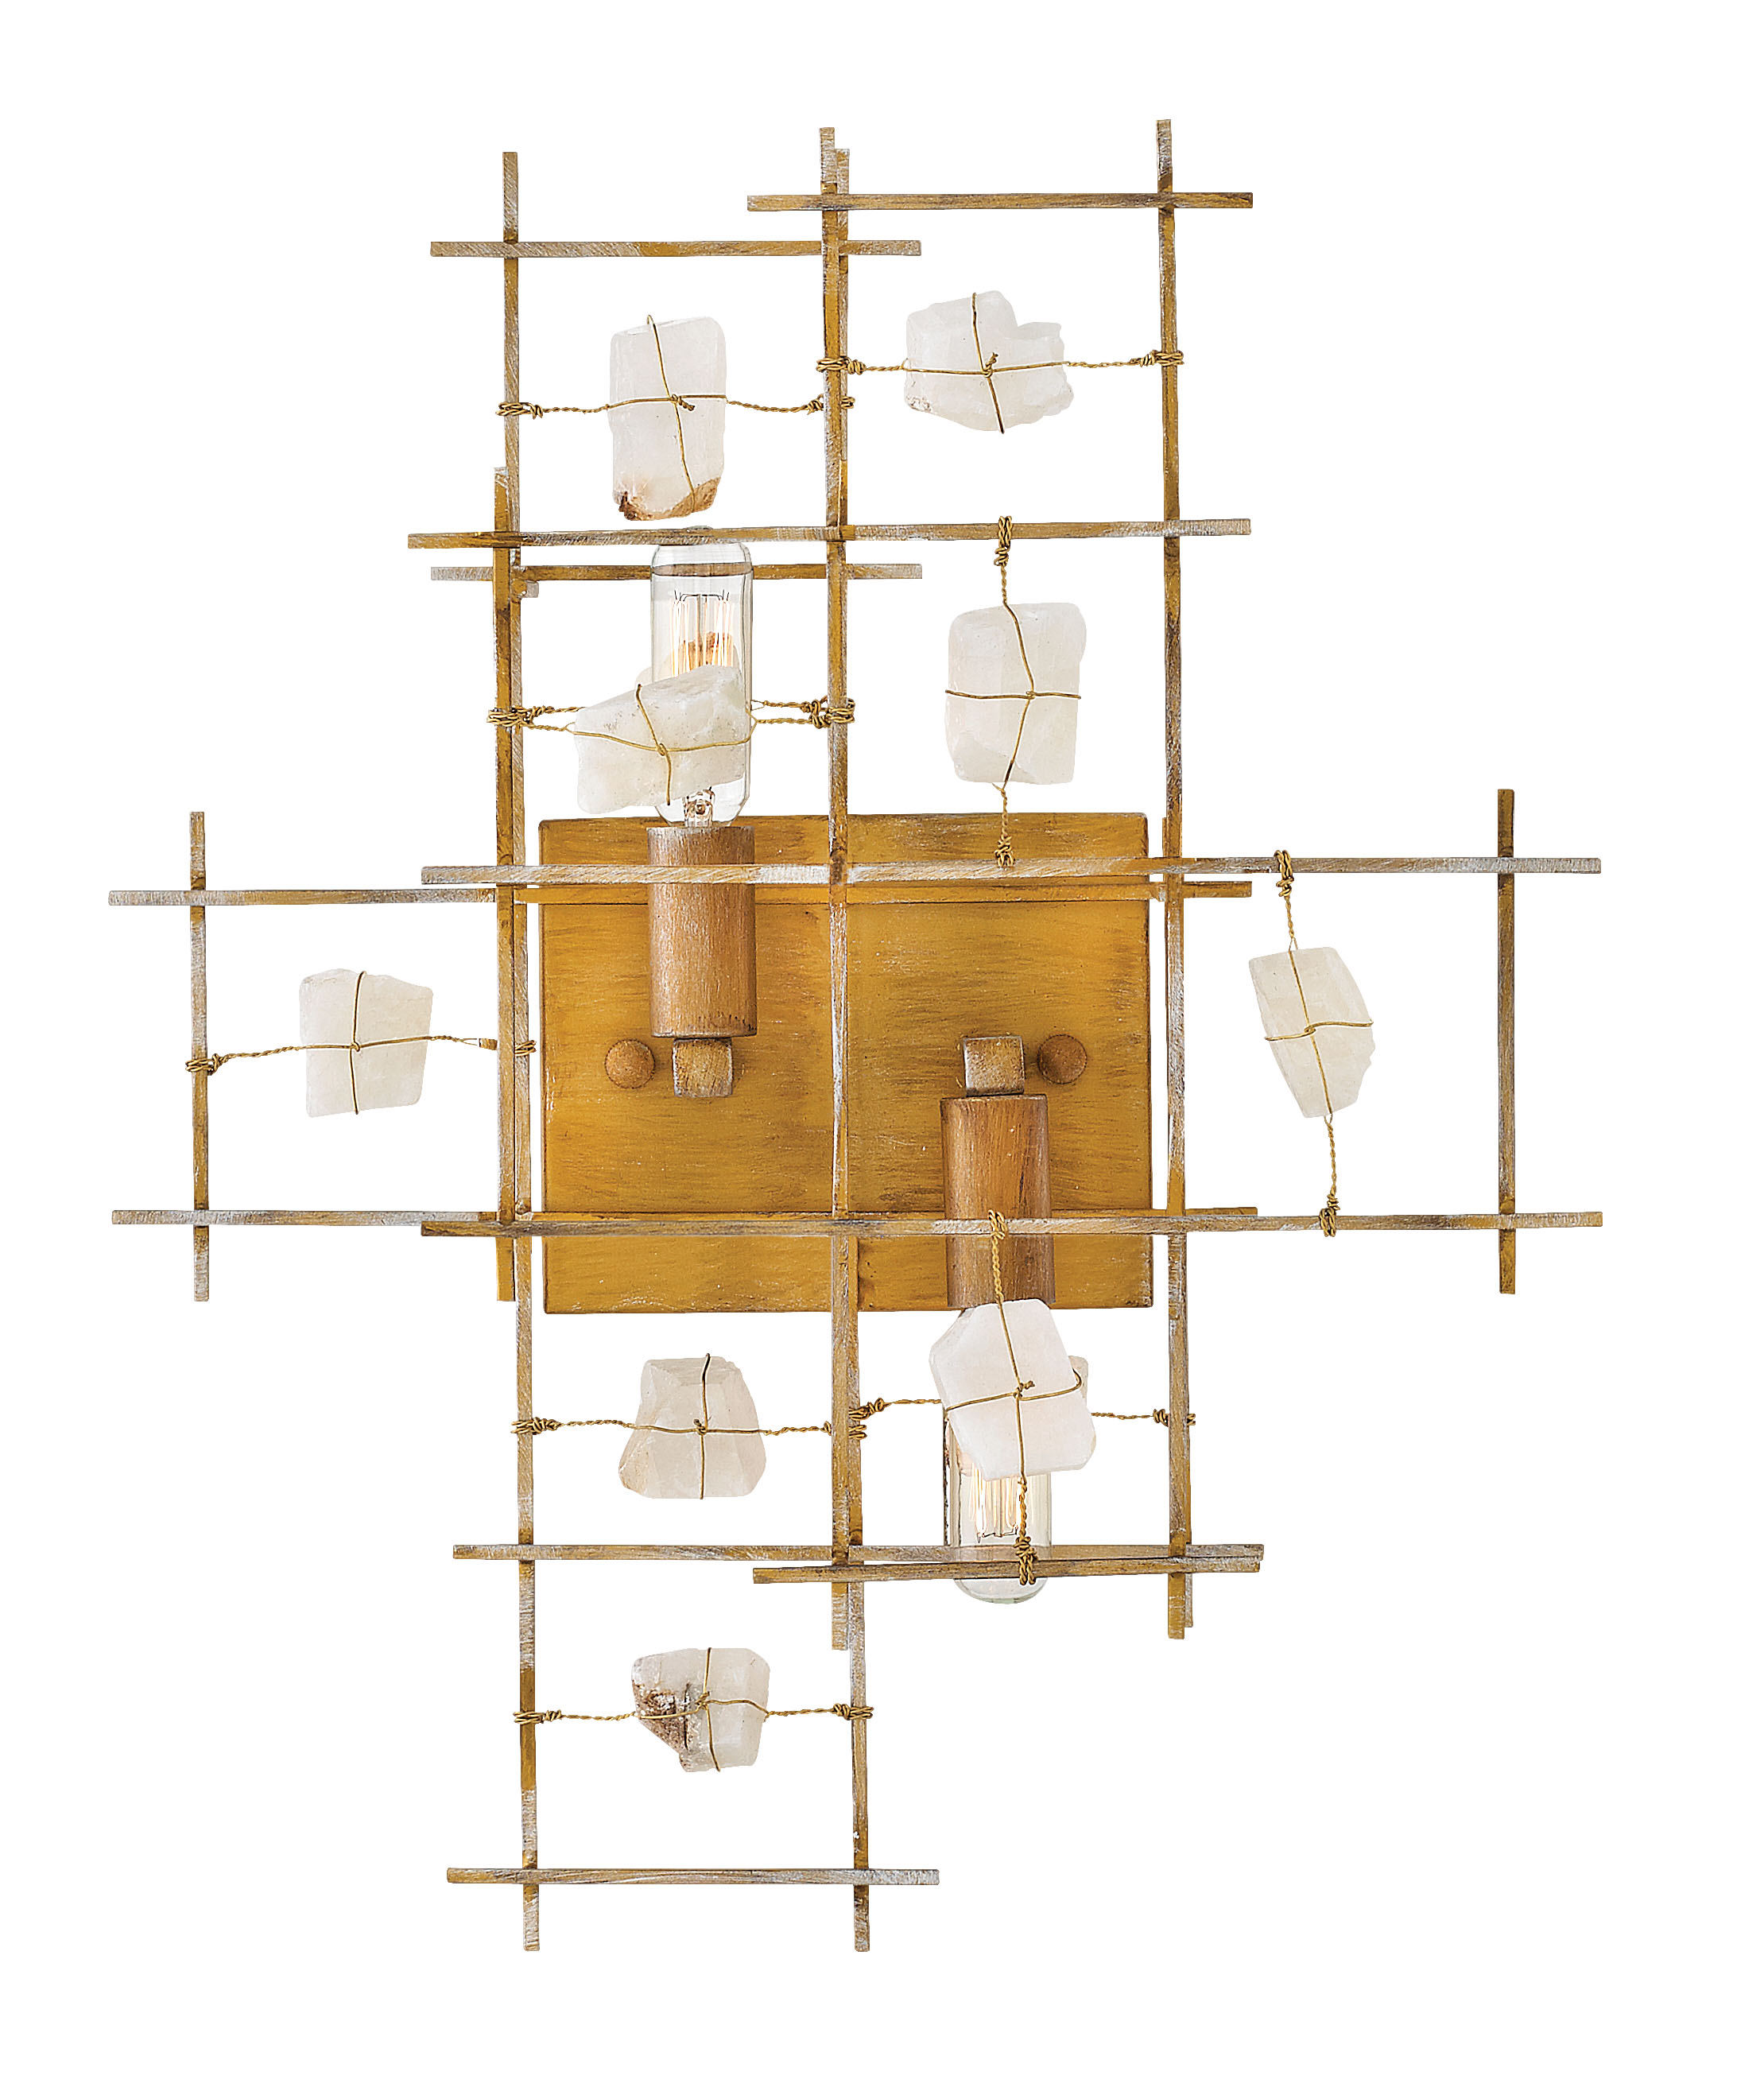 Petra sconce with natural crystals held by wires from Frederick Ramond for Hinkley Lighting